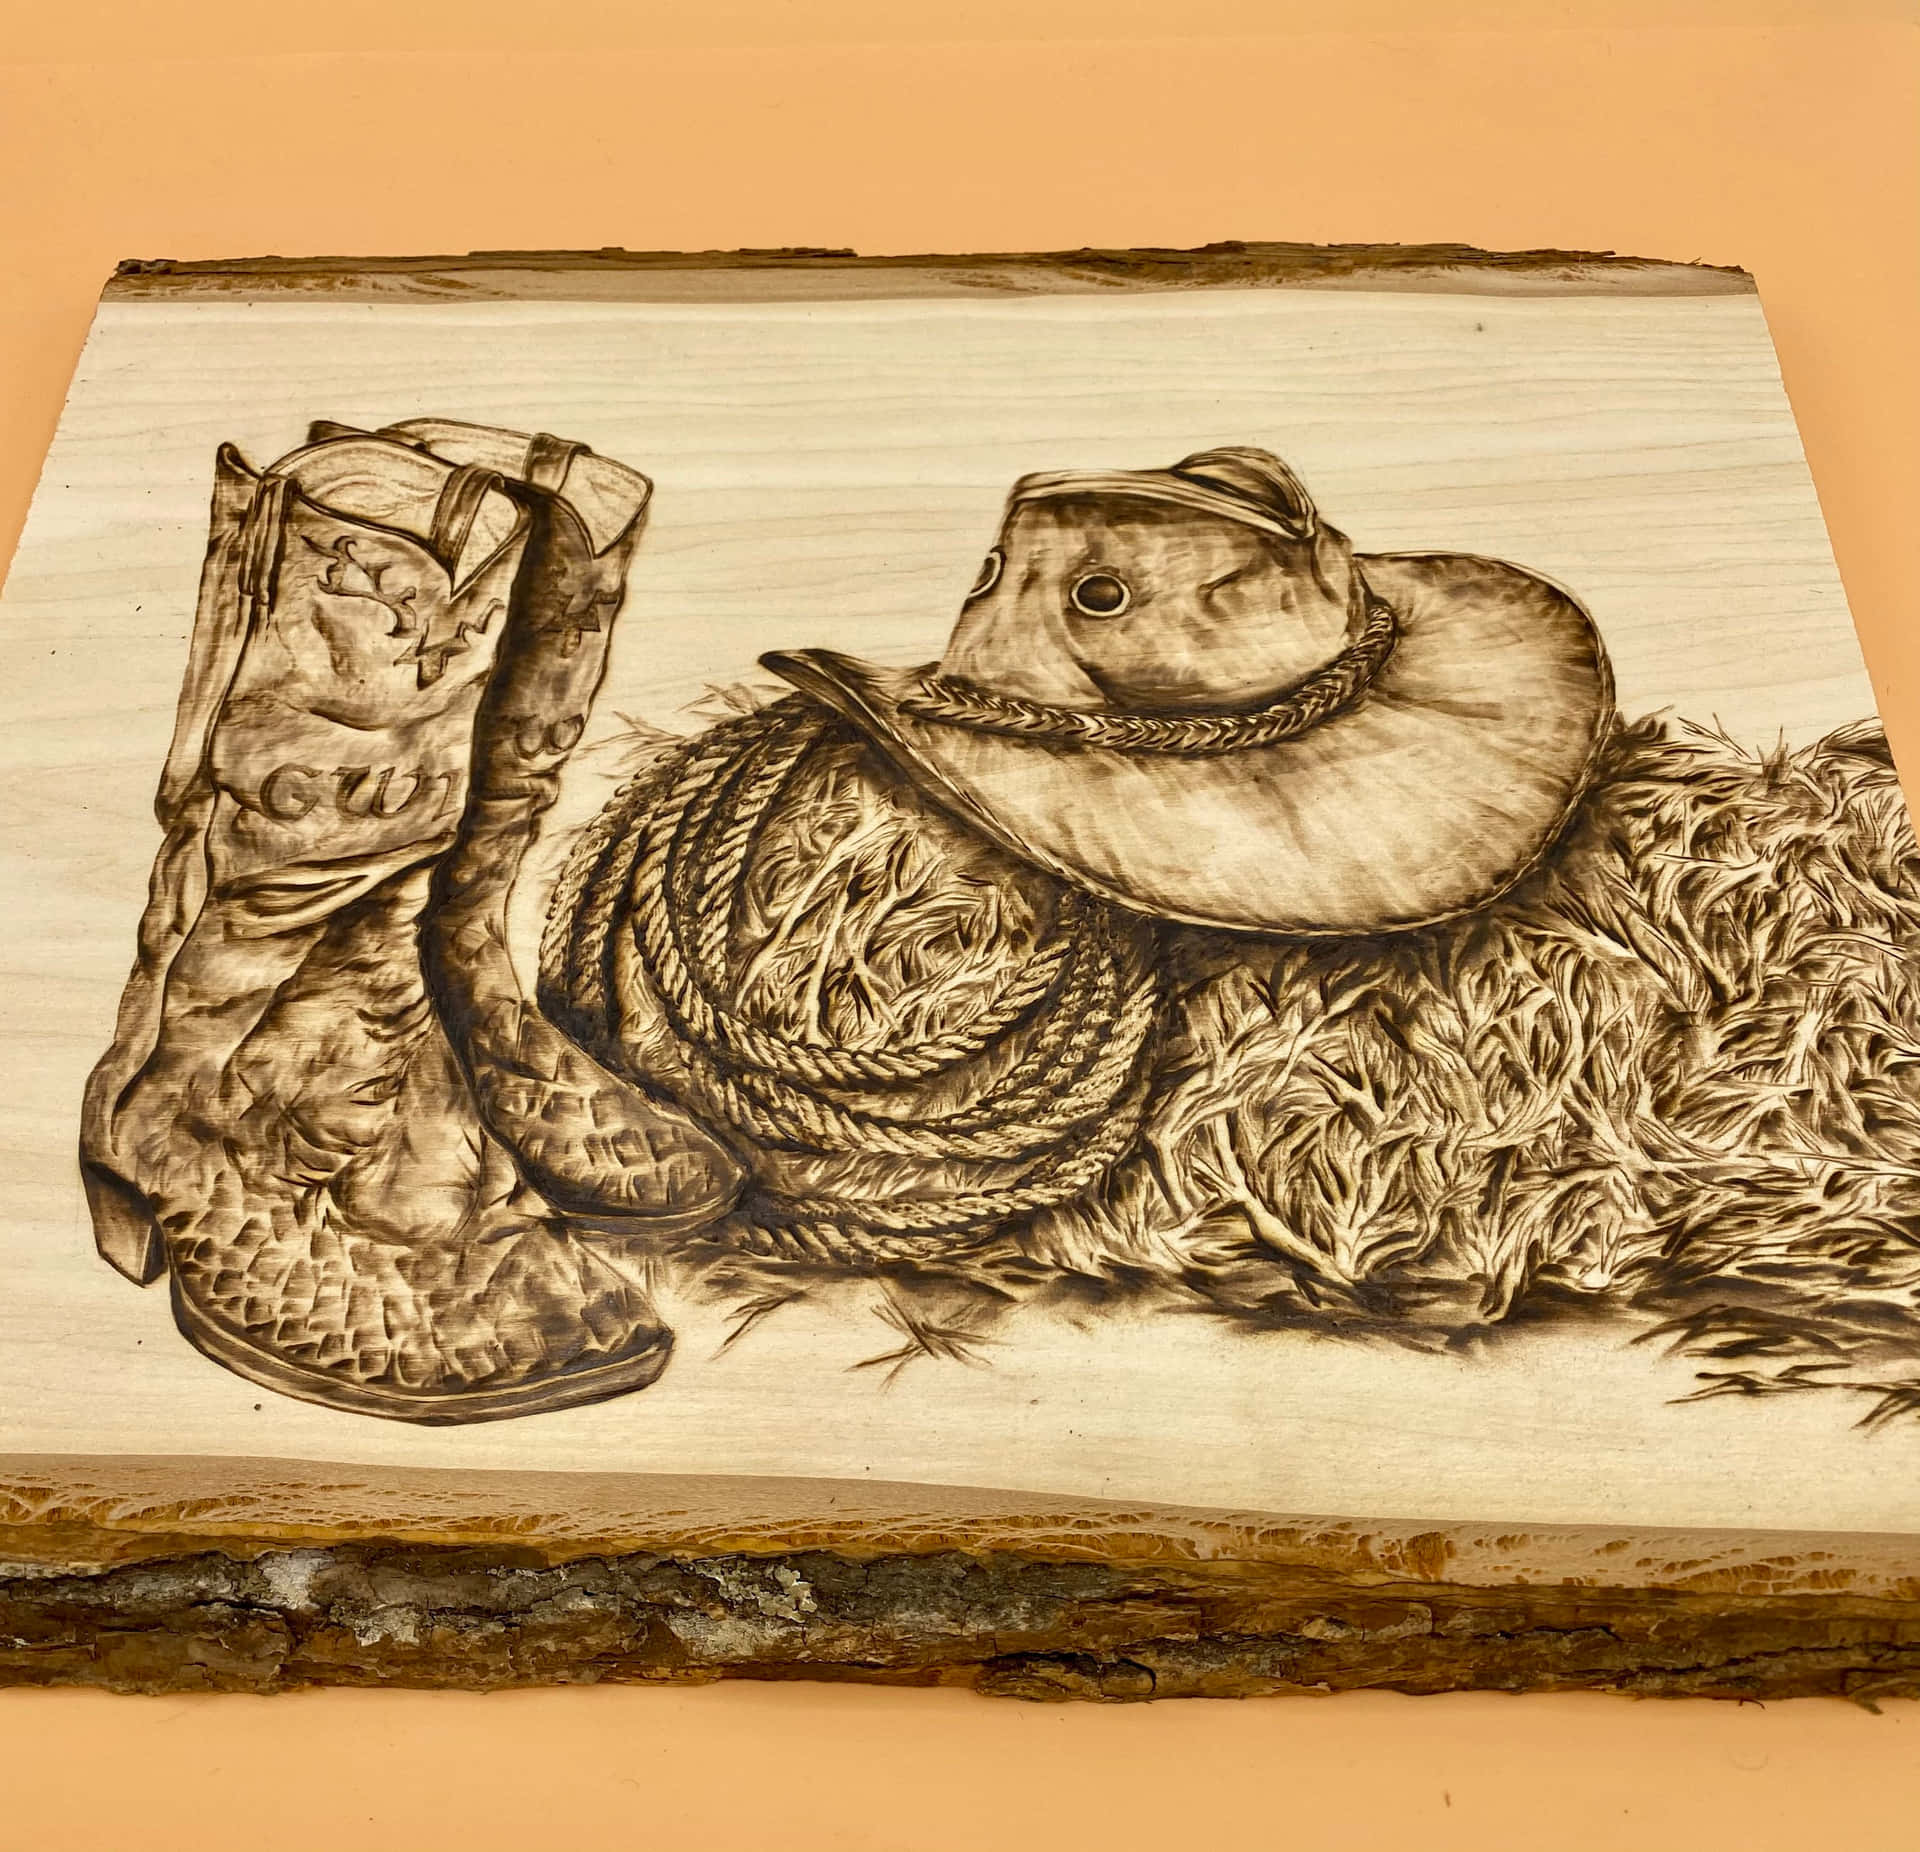 A Wooden Cutting Board With A Cowboy Hat And Boots